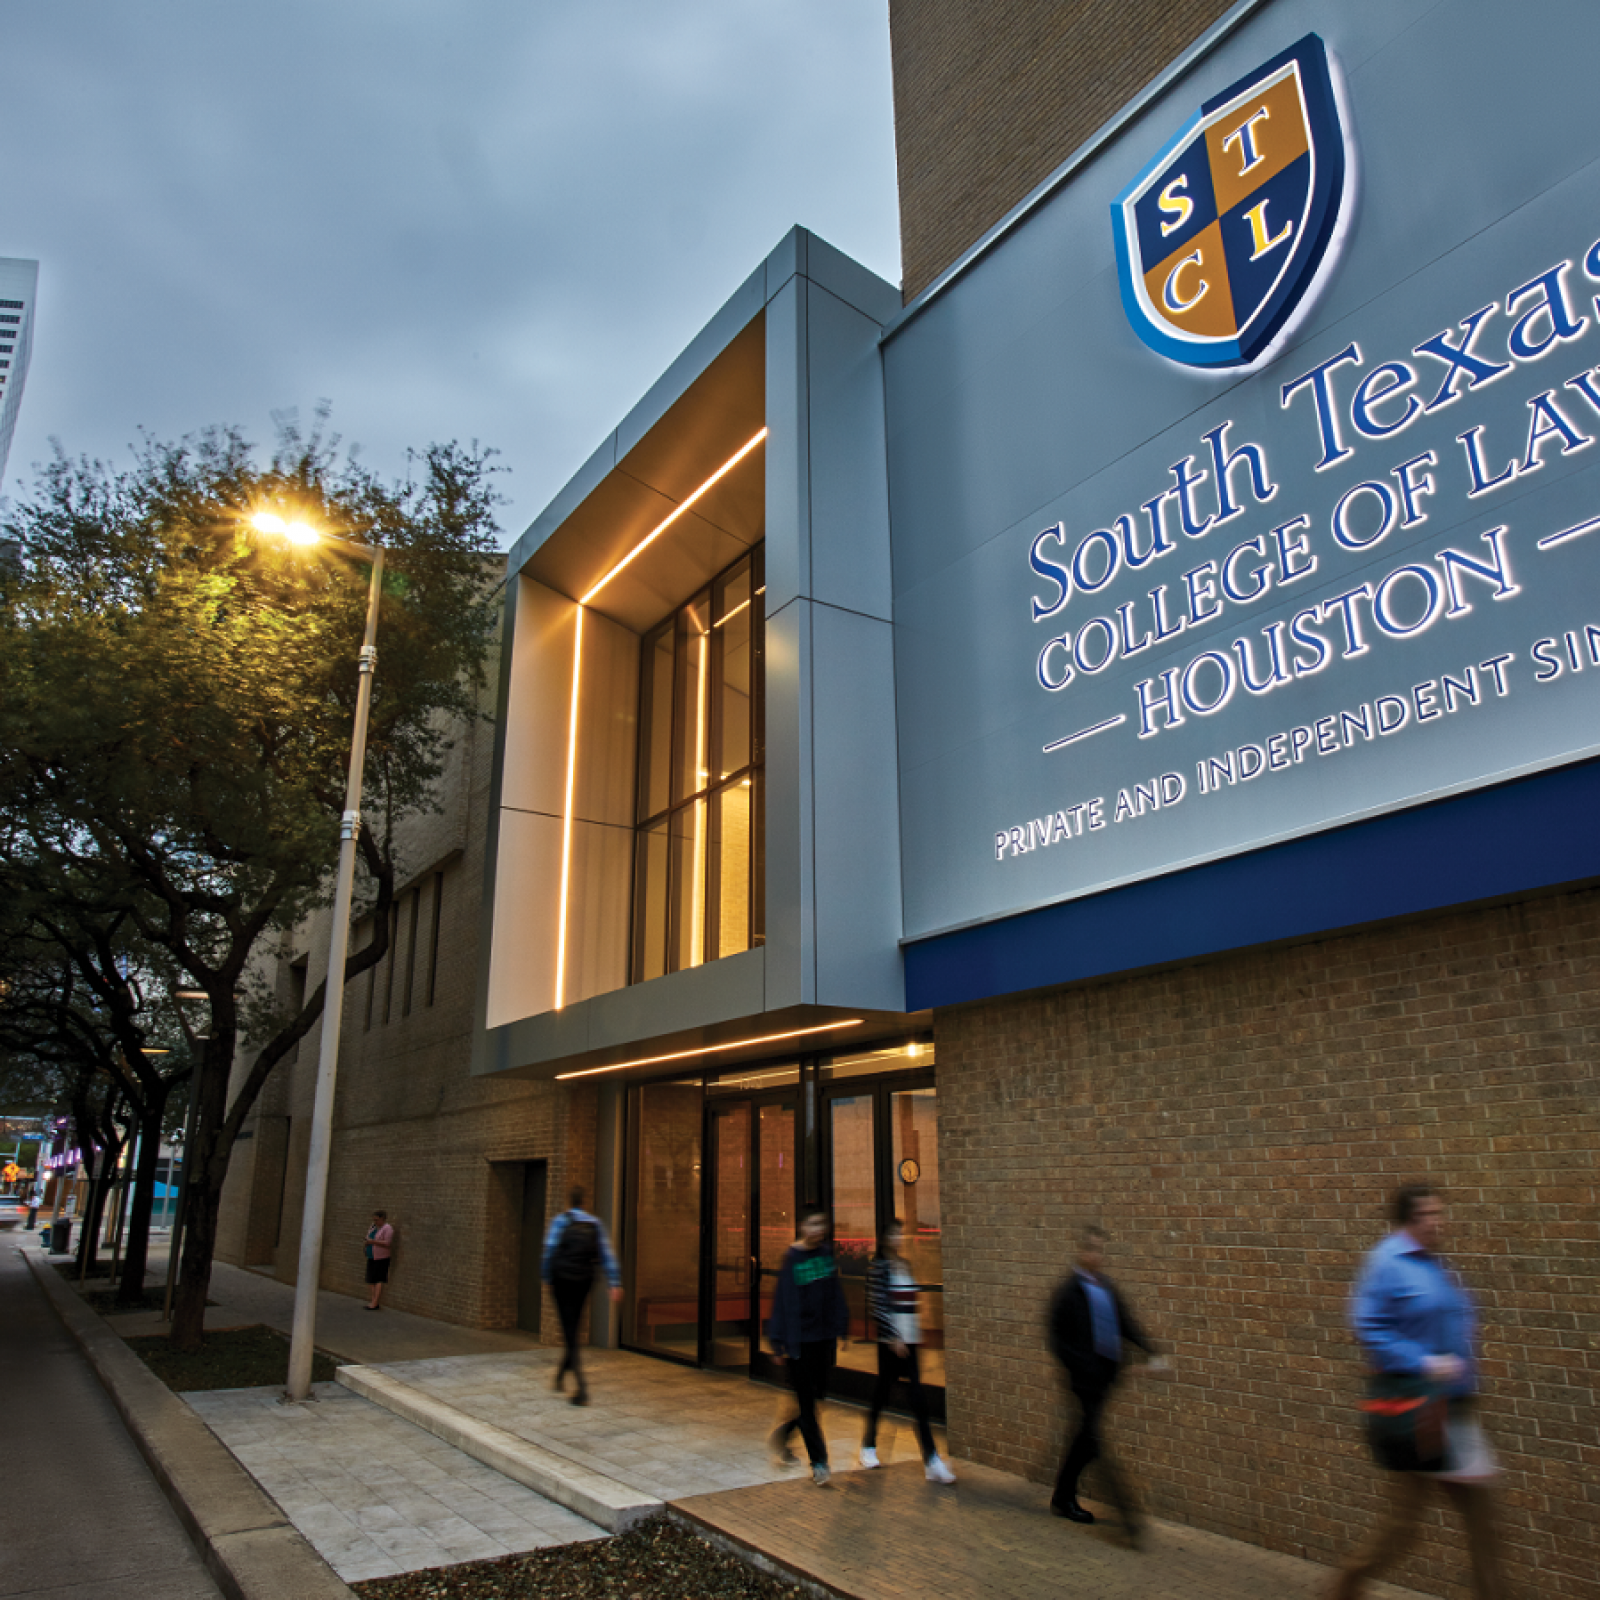 South Texas College of Law Houston